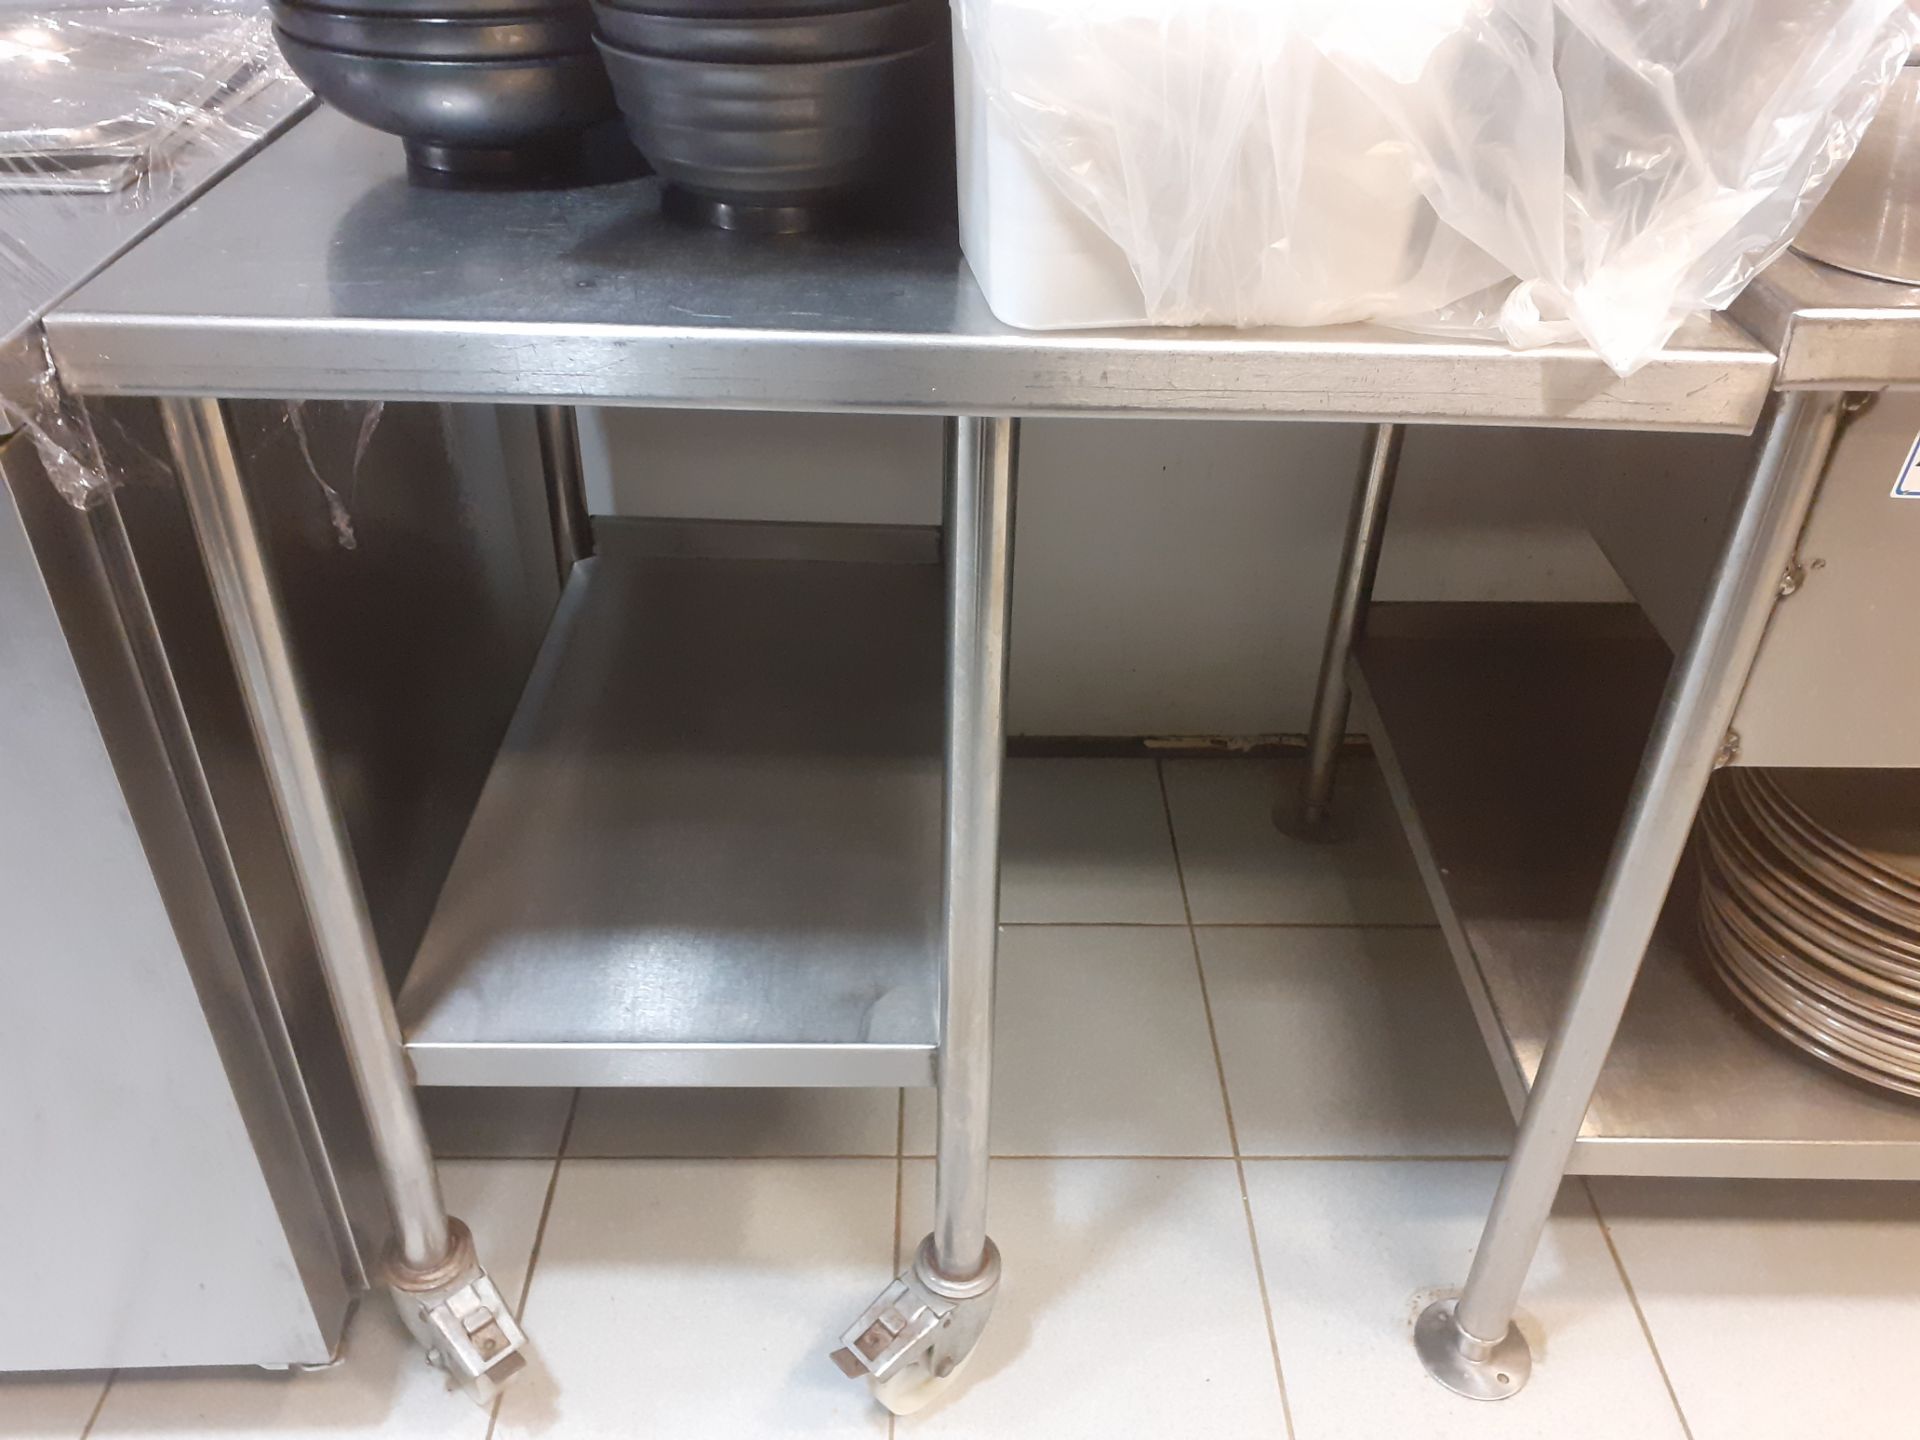 1 x Stainless Steel Prep Table With Undercounter and Castors - CL582 - Location: London EC4V